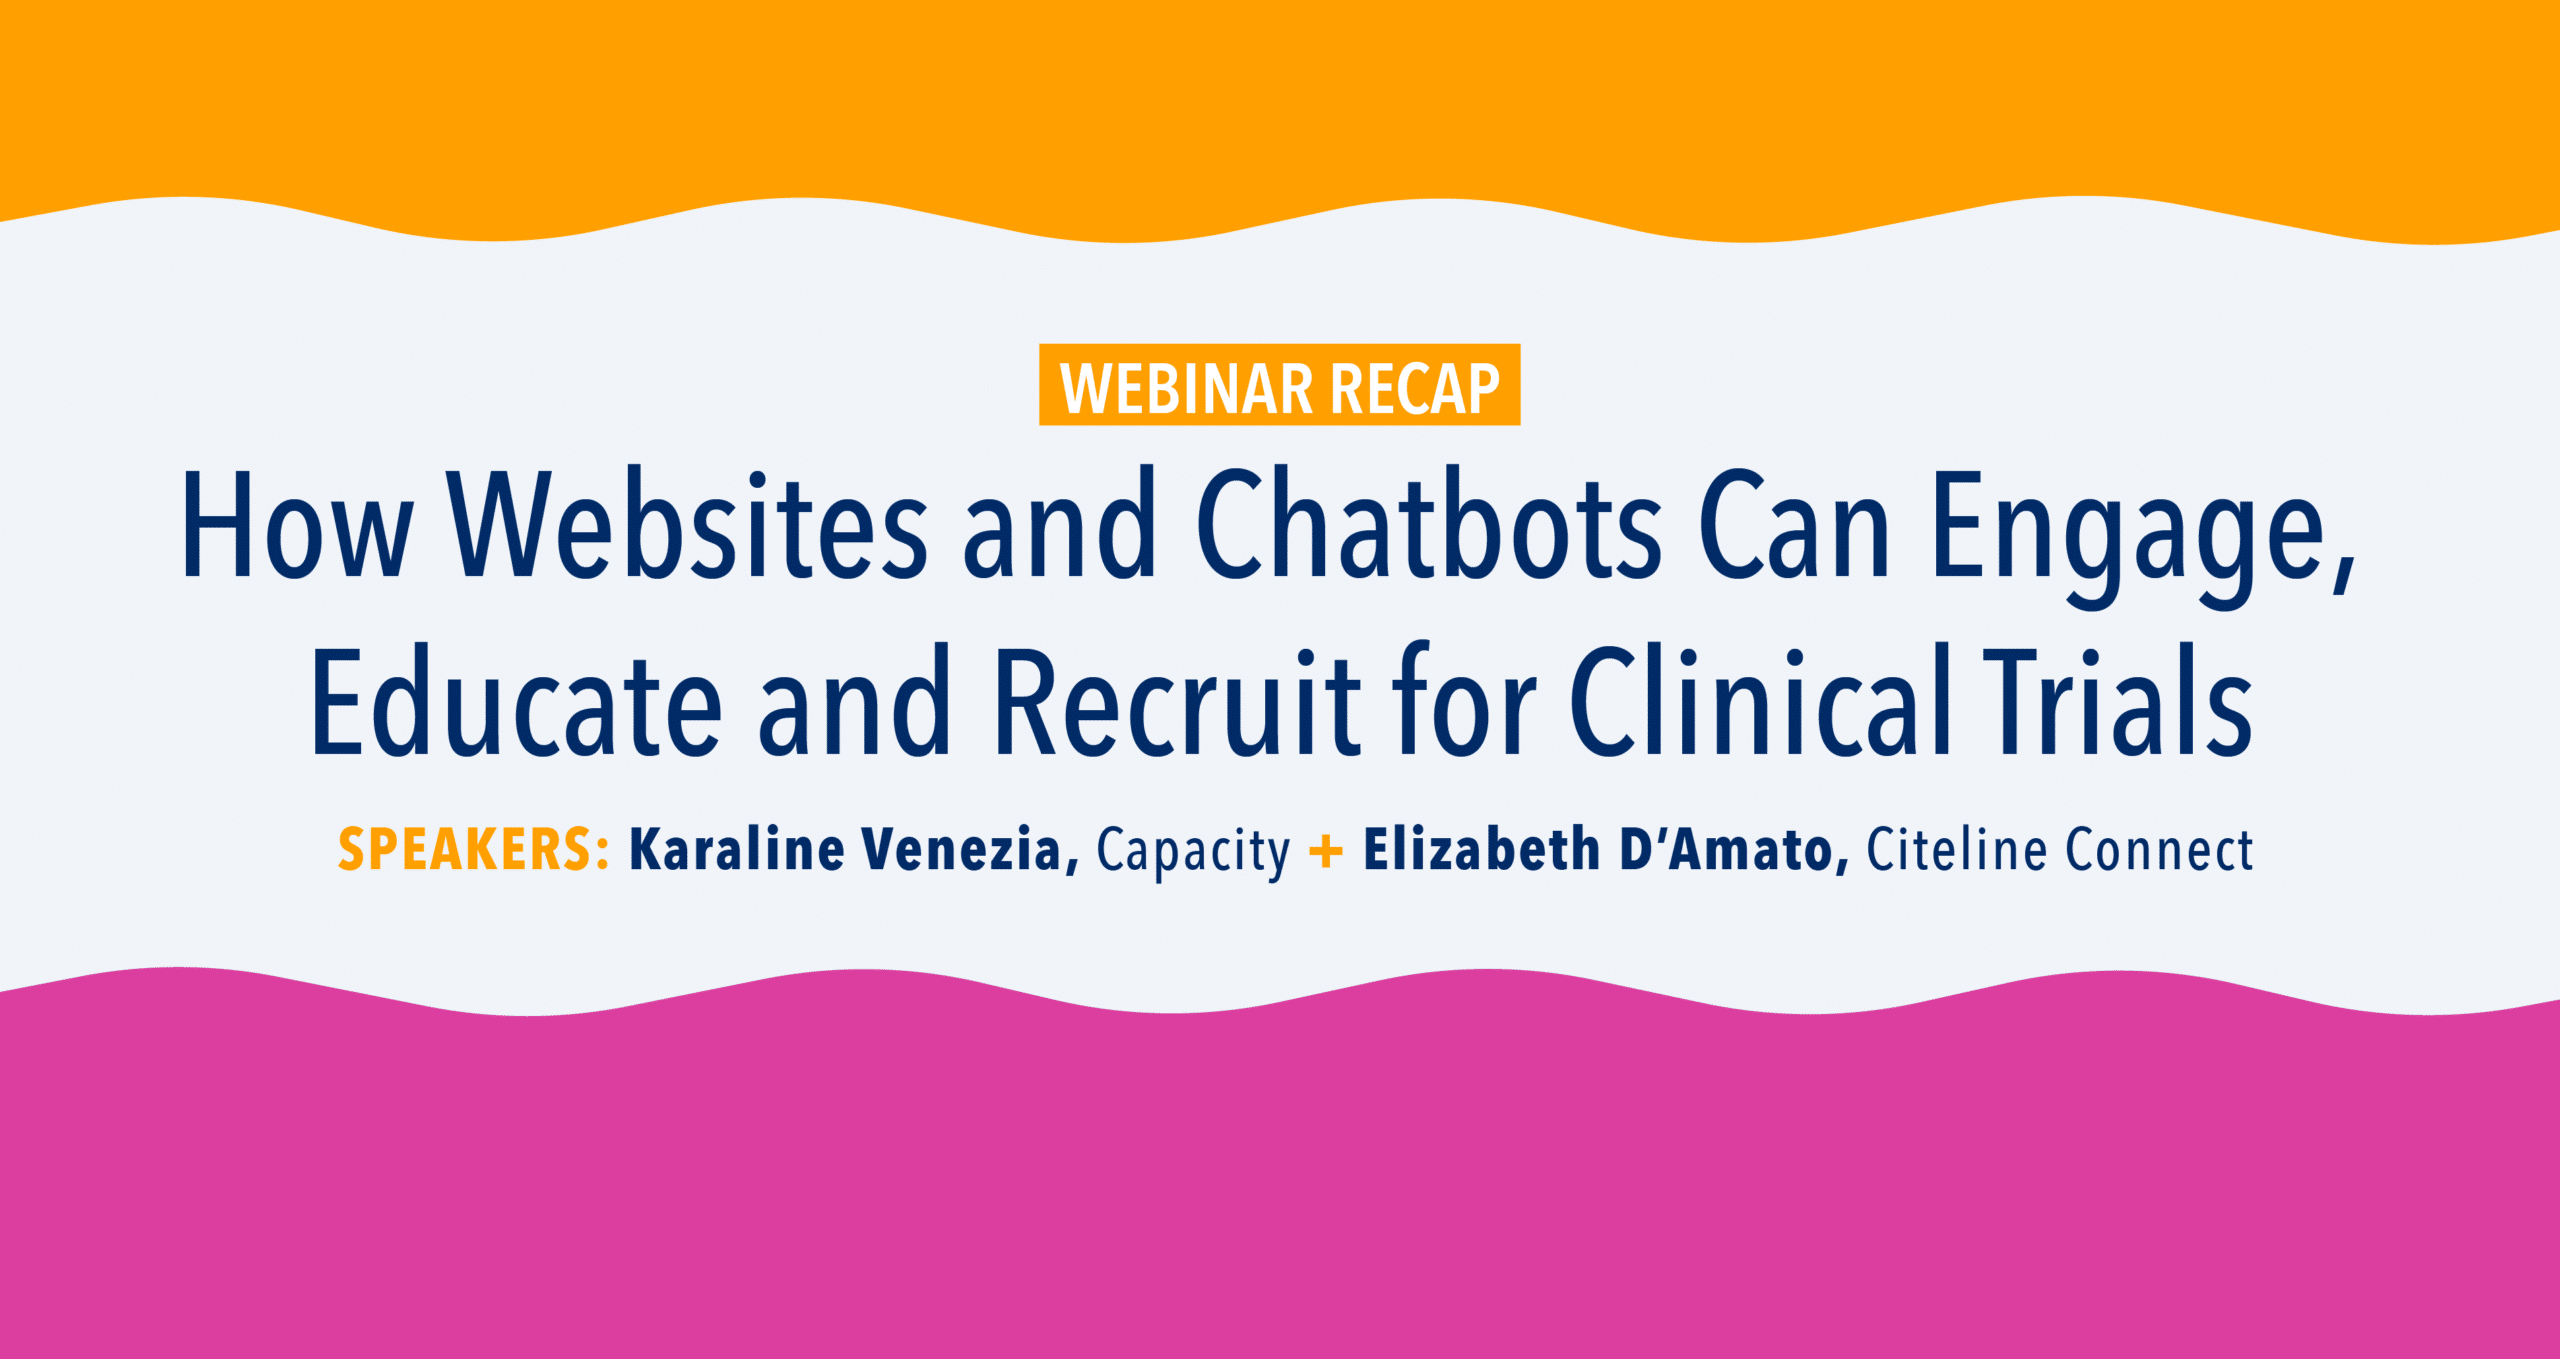 Webinar Recap: How Websites and Chatbots Can Engage, Educate and Recruit for Clinical Trials